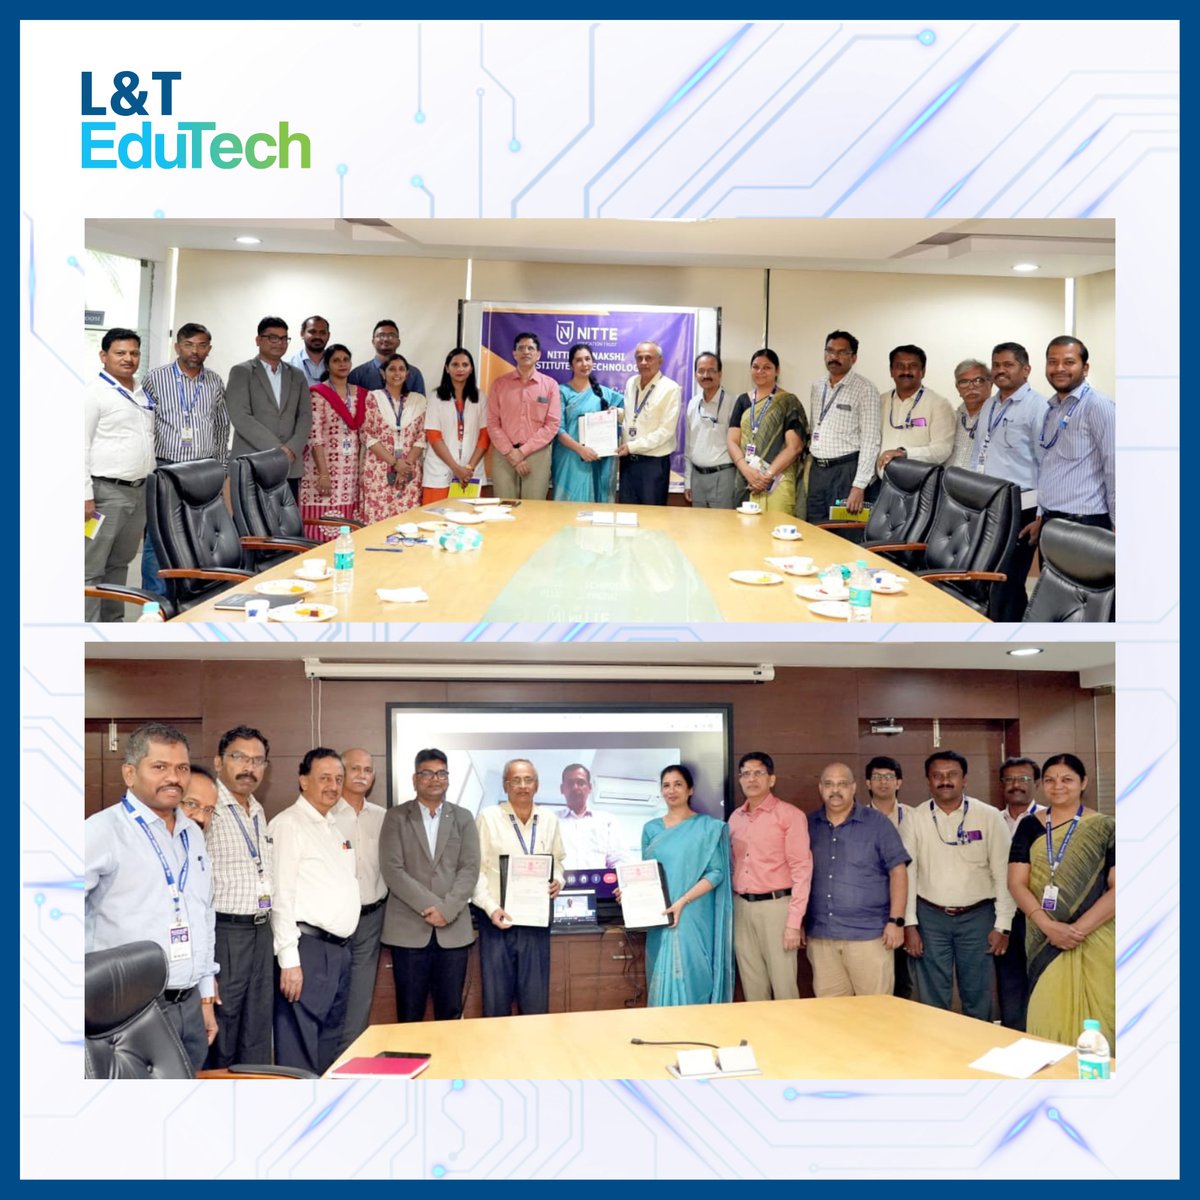 L&T Edutech is pleased to announce a collaborative partnership with Nitte Meenakshi Institute of Technology (NMIT Bangalore) to offer Integrated Career Programs in Civil Engineering and Mechanical Engineering.
@NMITBangalore
#lnt #lntedutech #wearelnt #Partnership #collegeconnect